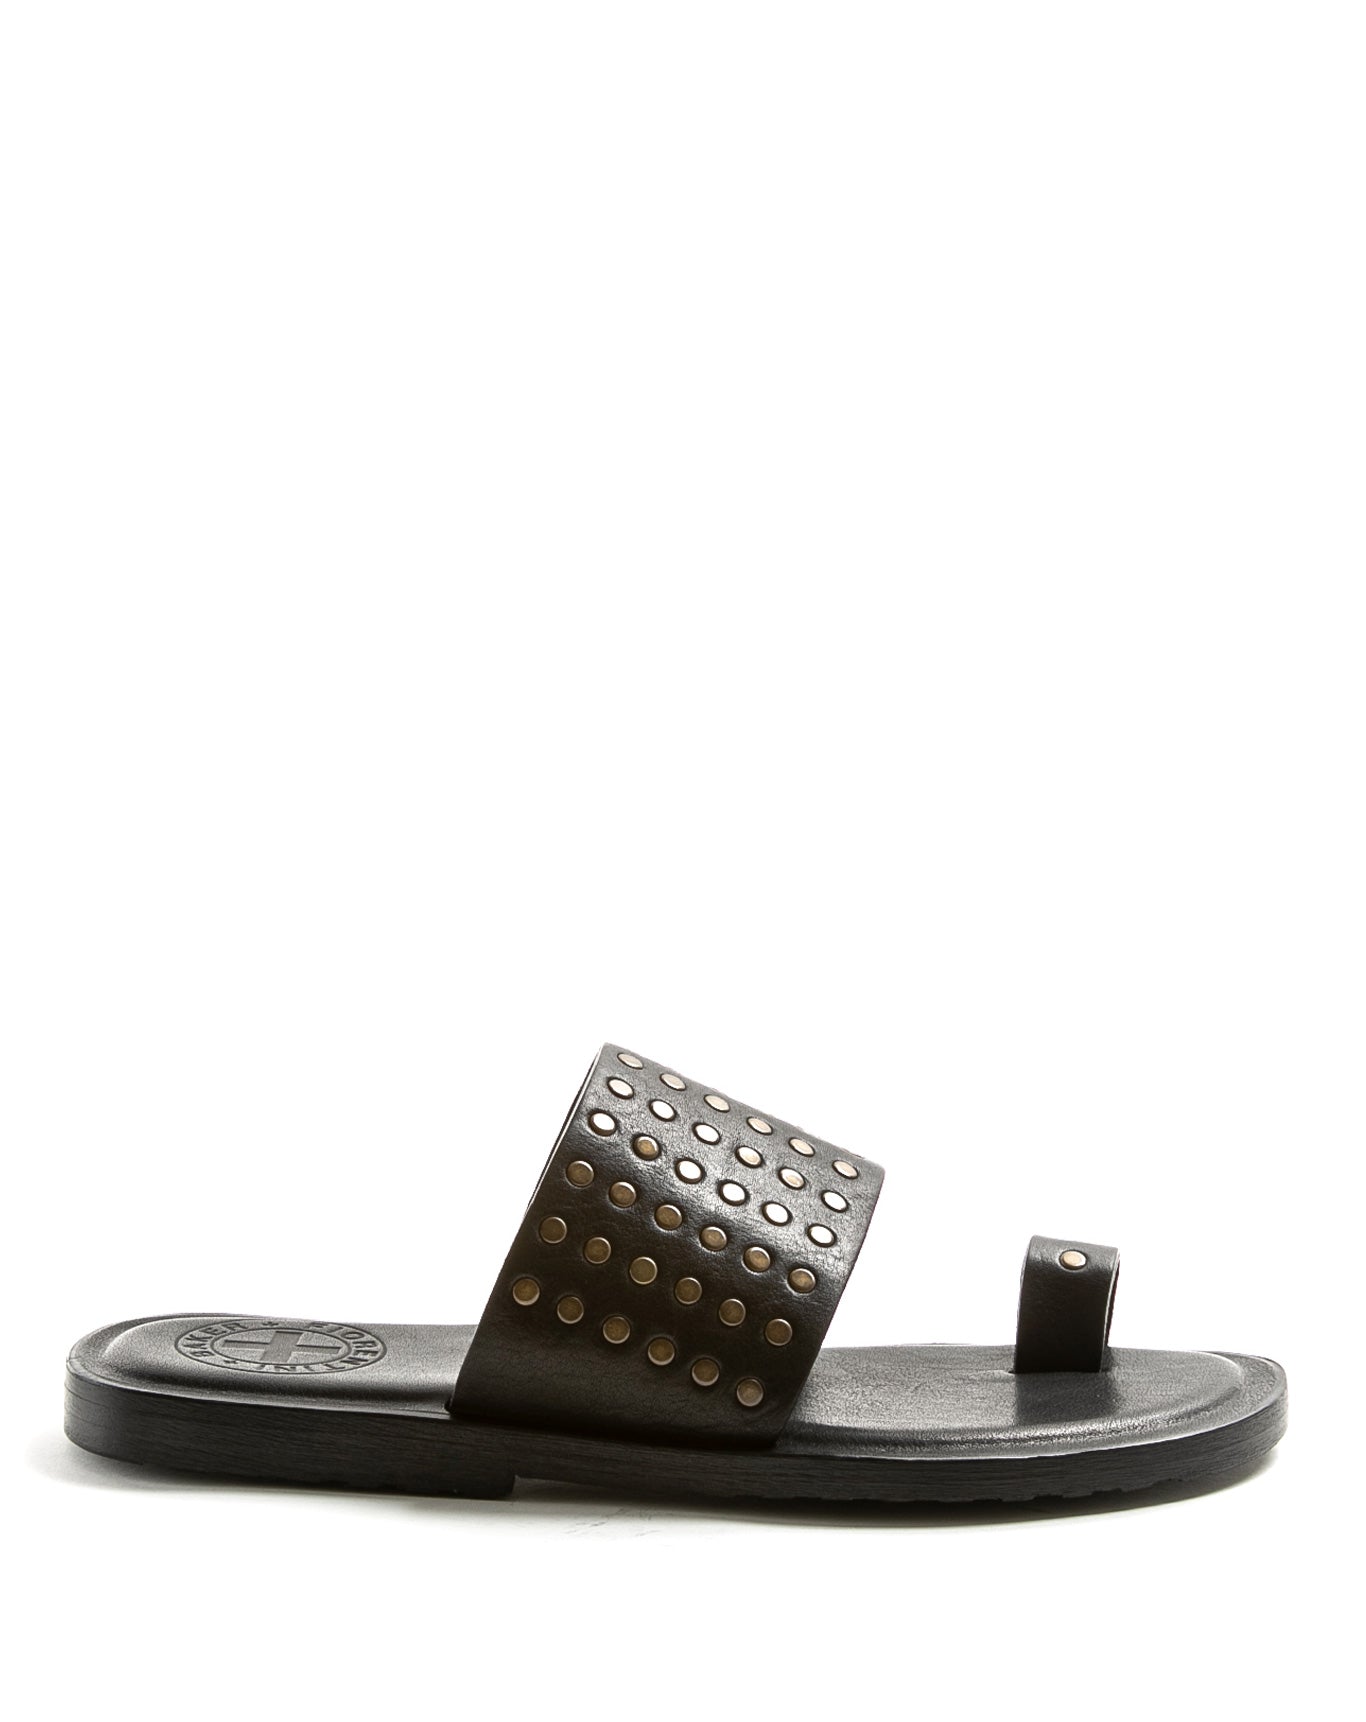 FIORENTINI + BAKER, ZANTE ZATTY, Extremely comfortable and supple lined leather slip on sandals with studs. Handcrafted by skilled artisans. Made in Italy. Made to last.